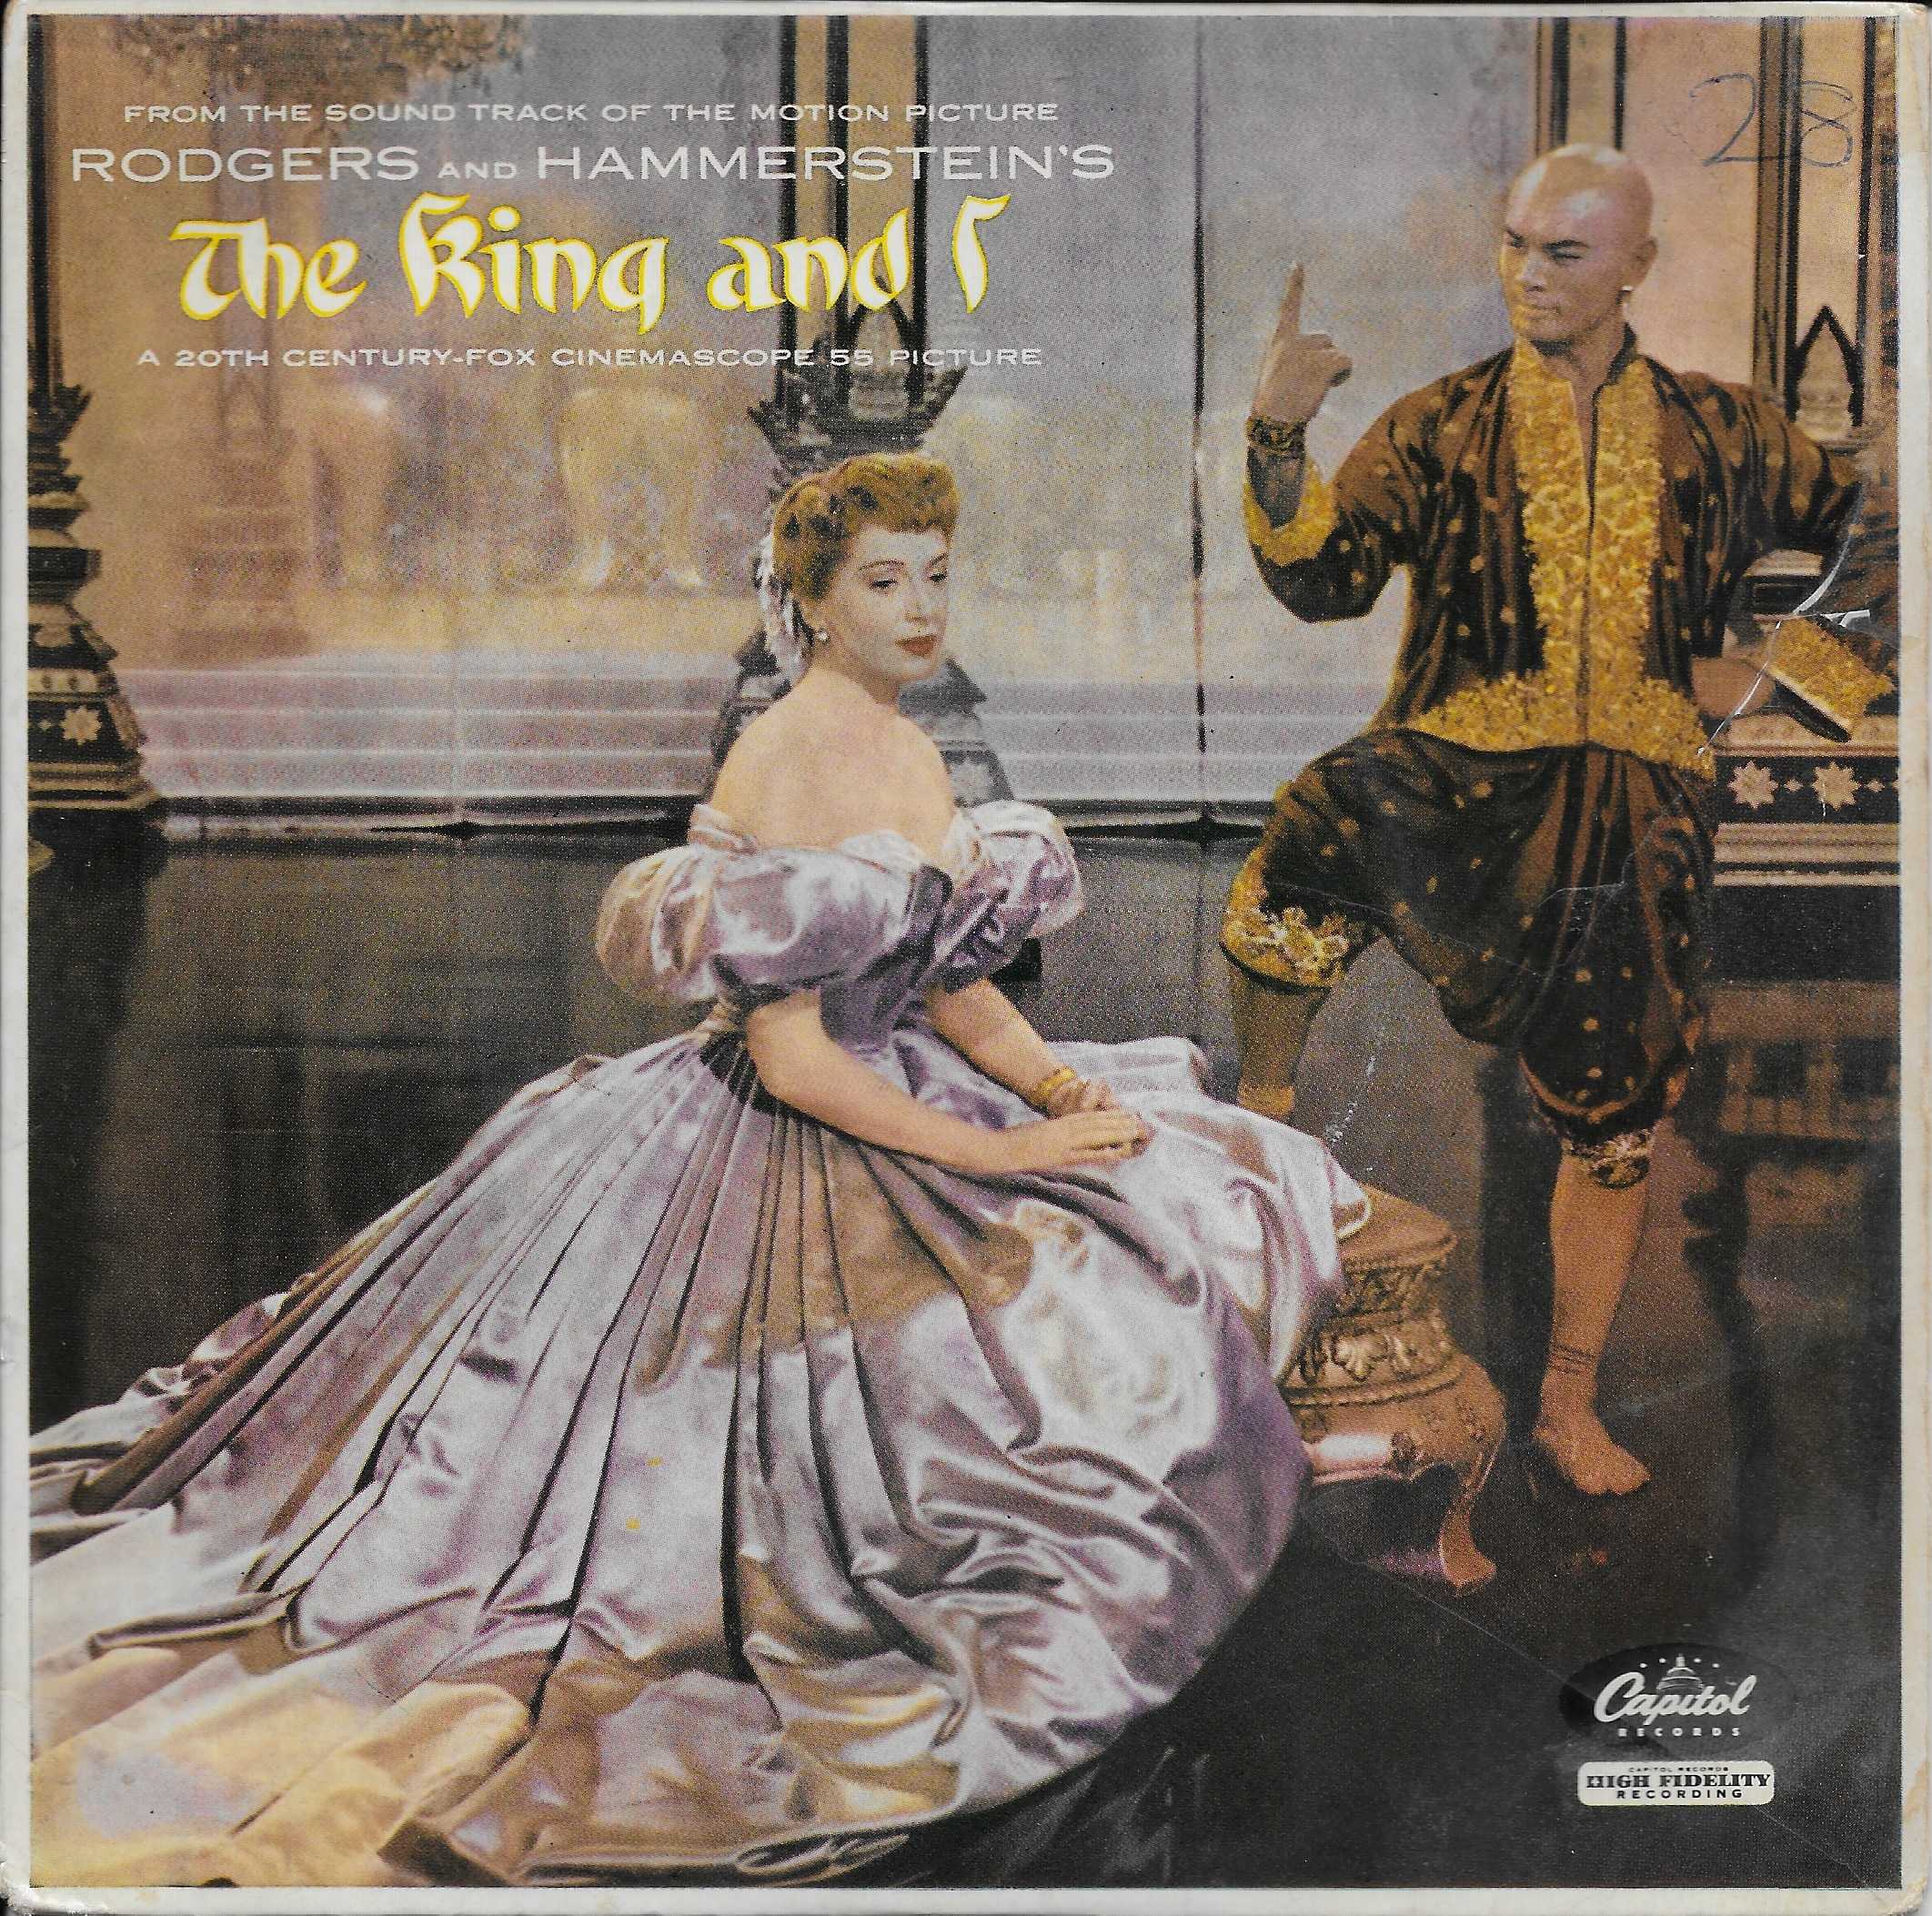 Picture of EAP 2-740 The King and I 2 by artist Rodgers / Hammerstein II from ITV, Channel 4 and Channel 5 library